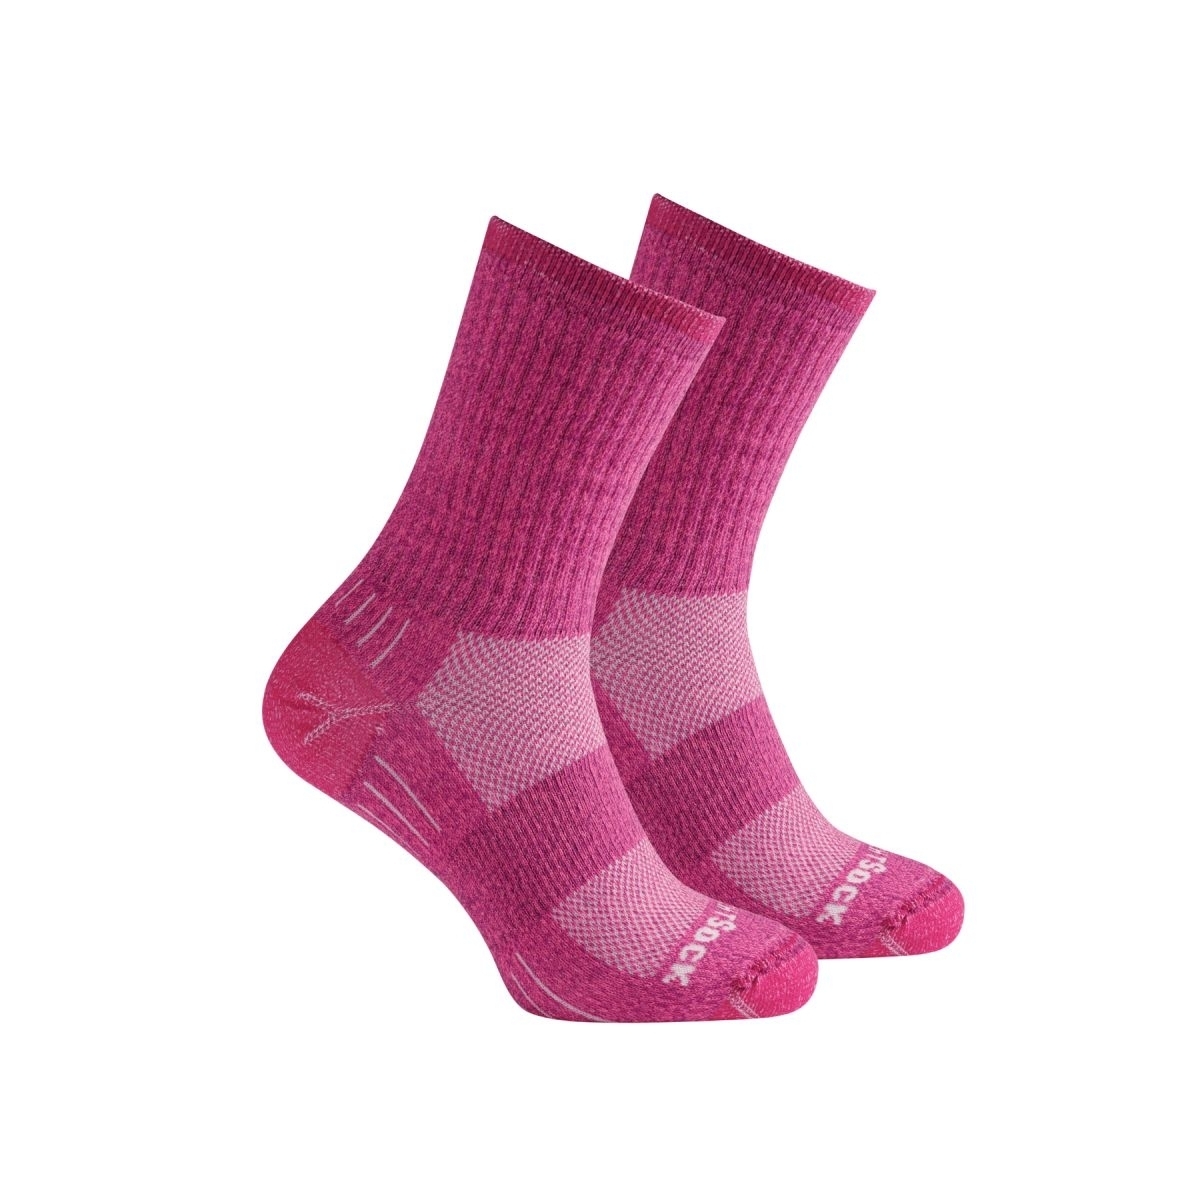 Wrightsock Unisex Escape Crew Socks Pink - 956.1401 - PINK, Small